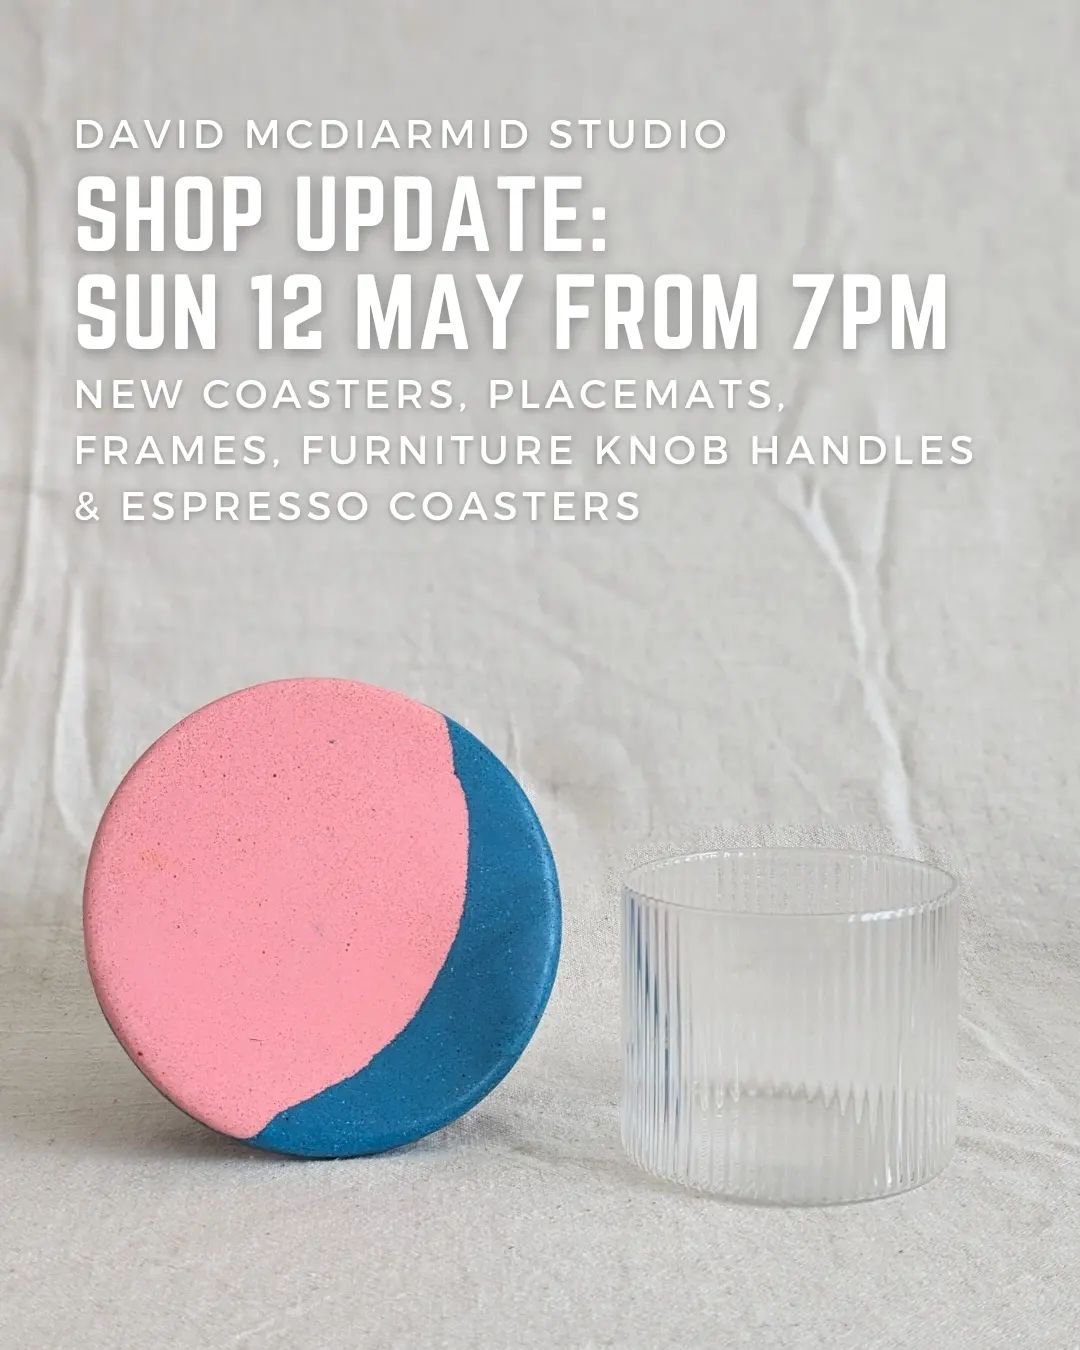 👀👀👀

Shop update from 7pm this Sunday!

I'll have a bunch of new coasters, placemats, furniture knobs handles and espresso coasters in some funky new finishes...

Check out my latest blog post for the full scoop!

#shopupdate #coastersets
#coaster